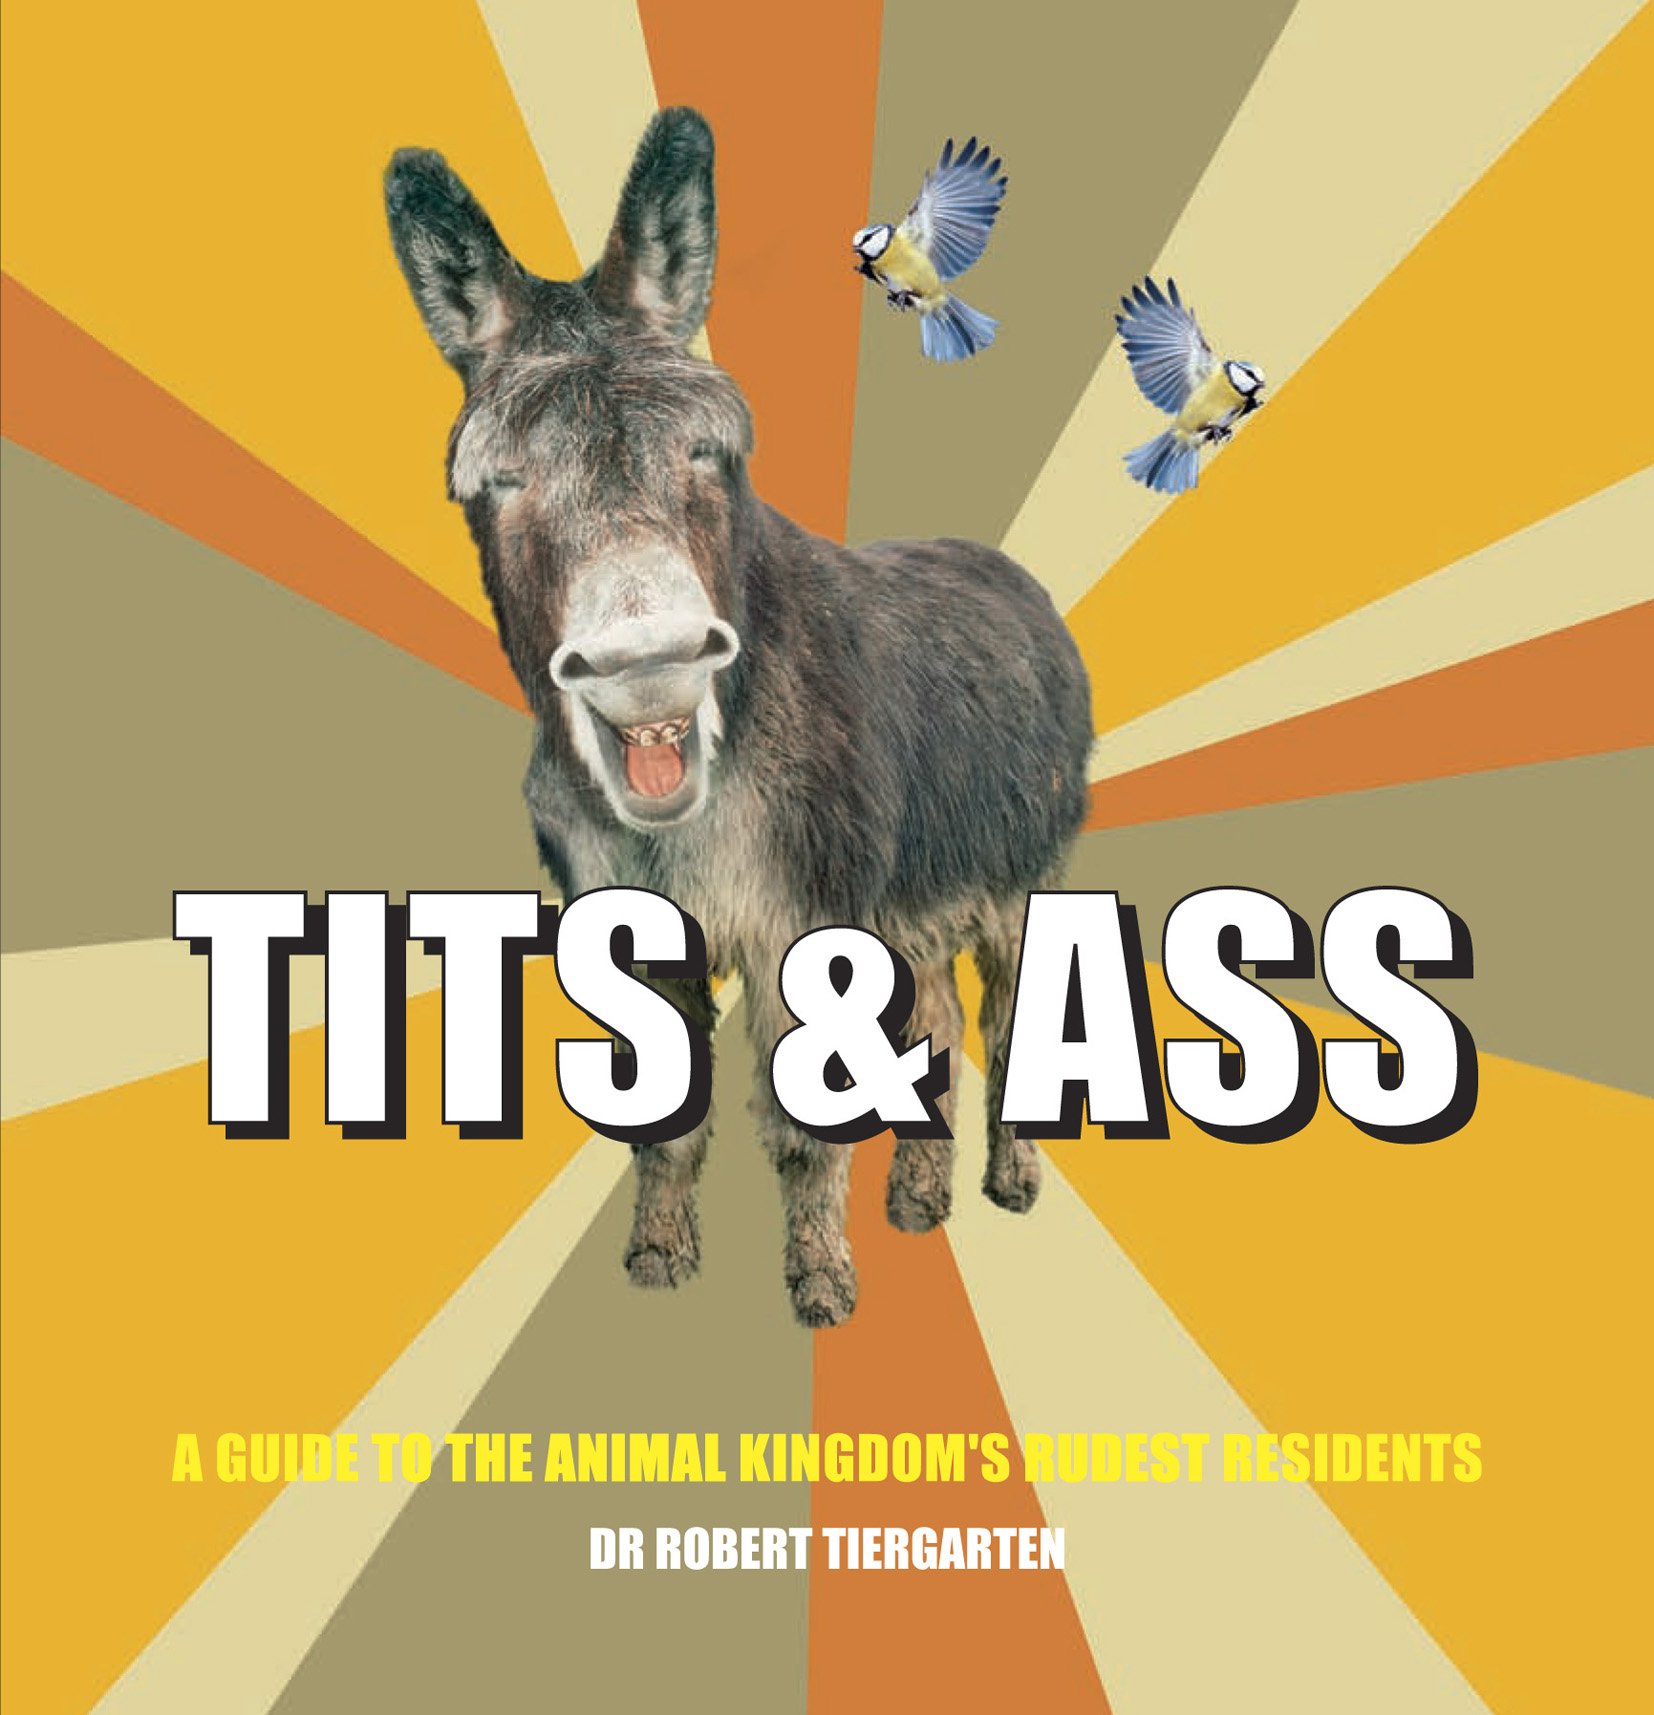 Tits and Ass - A guide to the animal kingdom's rudest residents